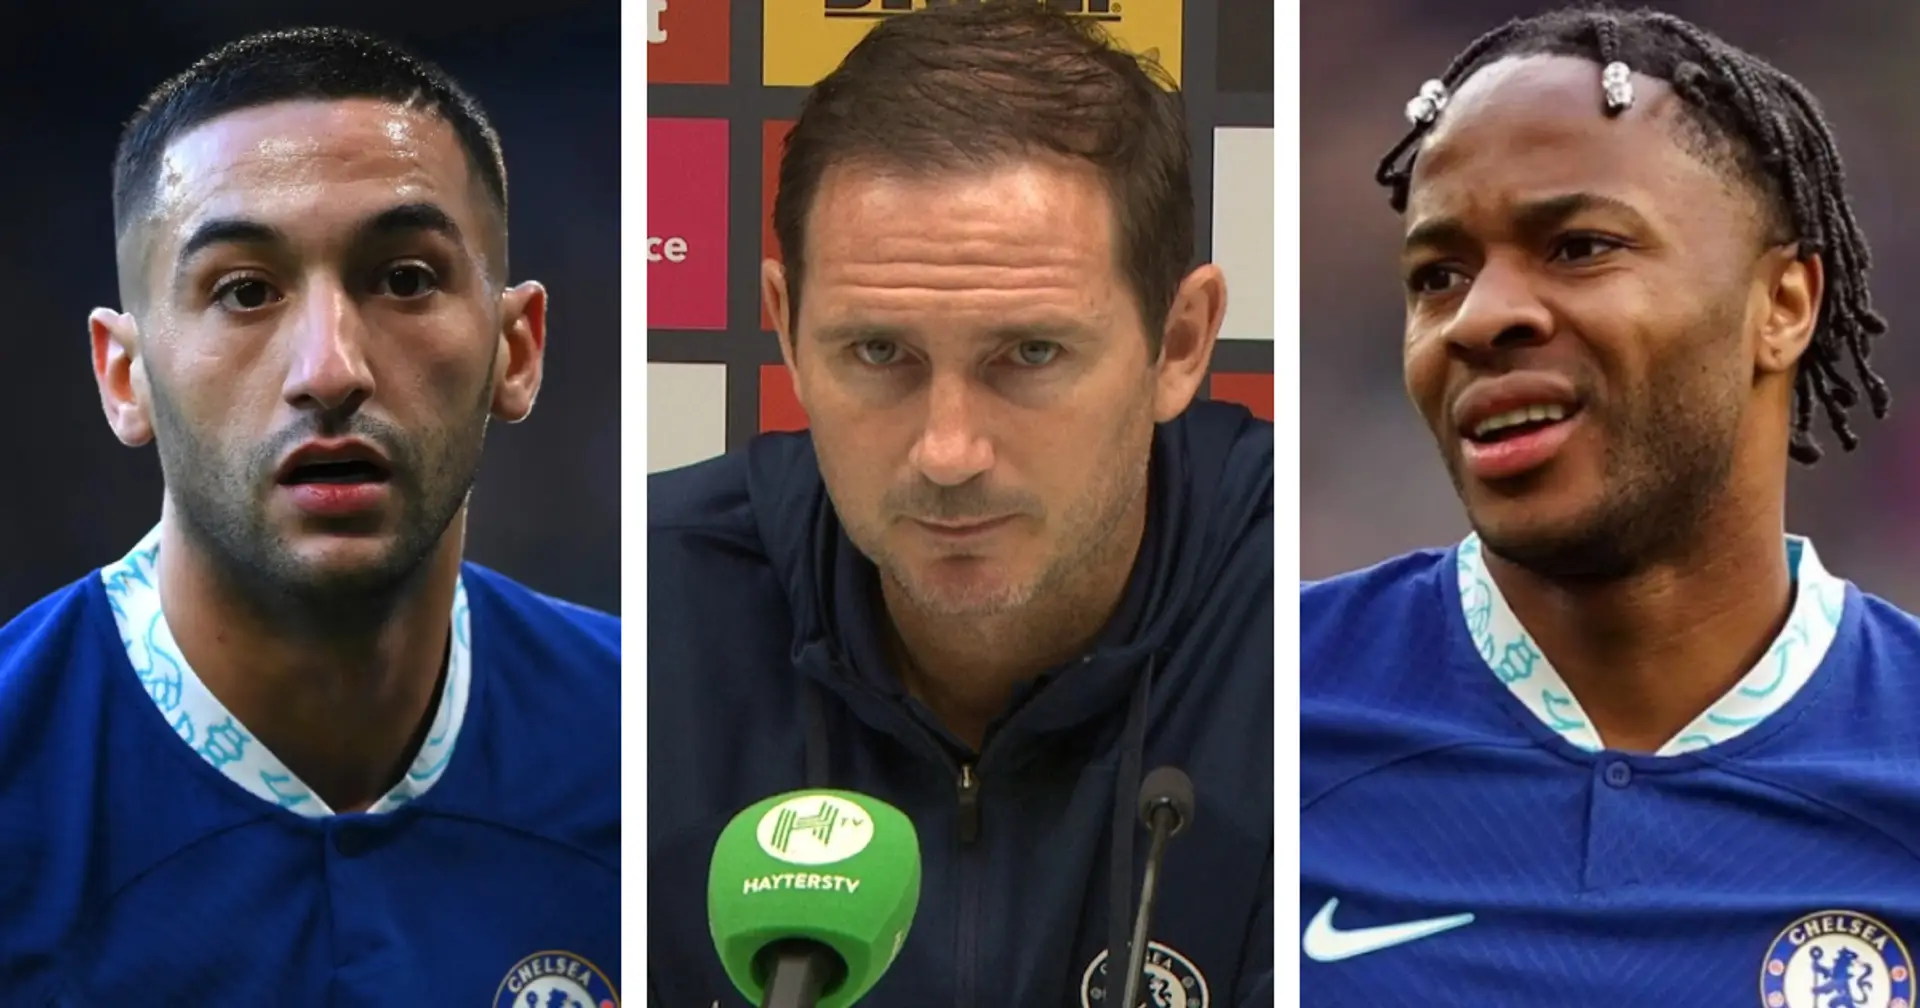 Sterling and Ziyech apparently booed by Chelsea fans in Bournemouth game, Lampard reacts